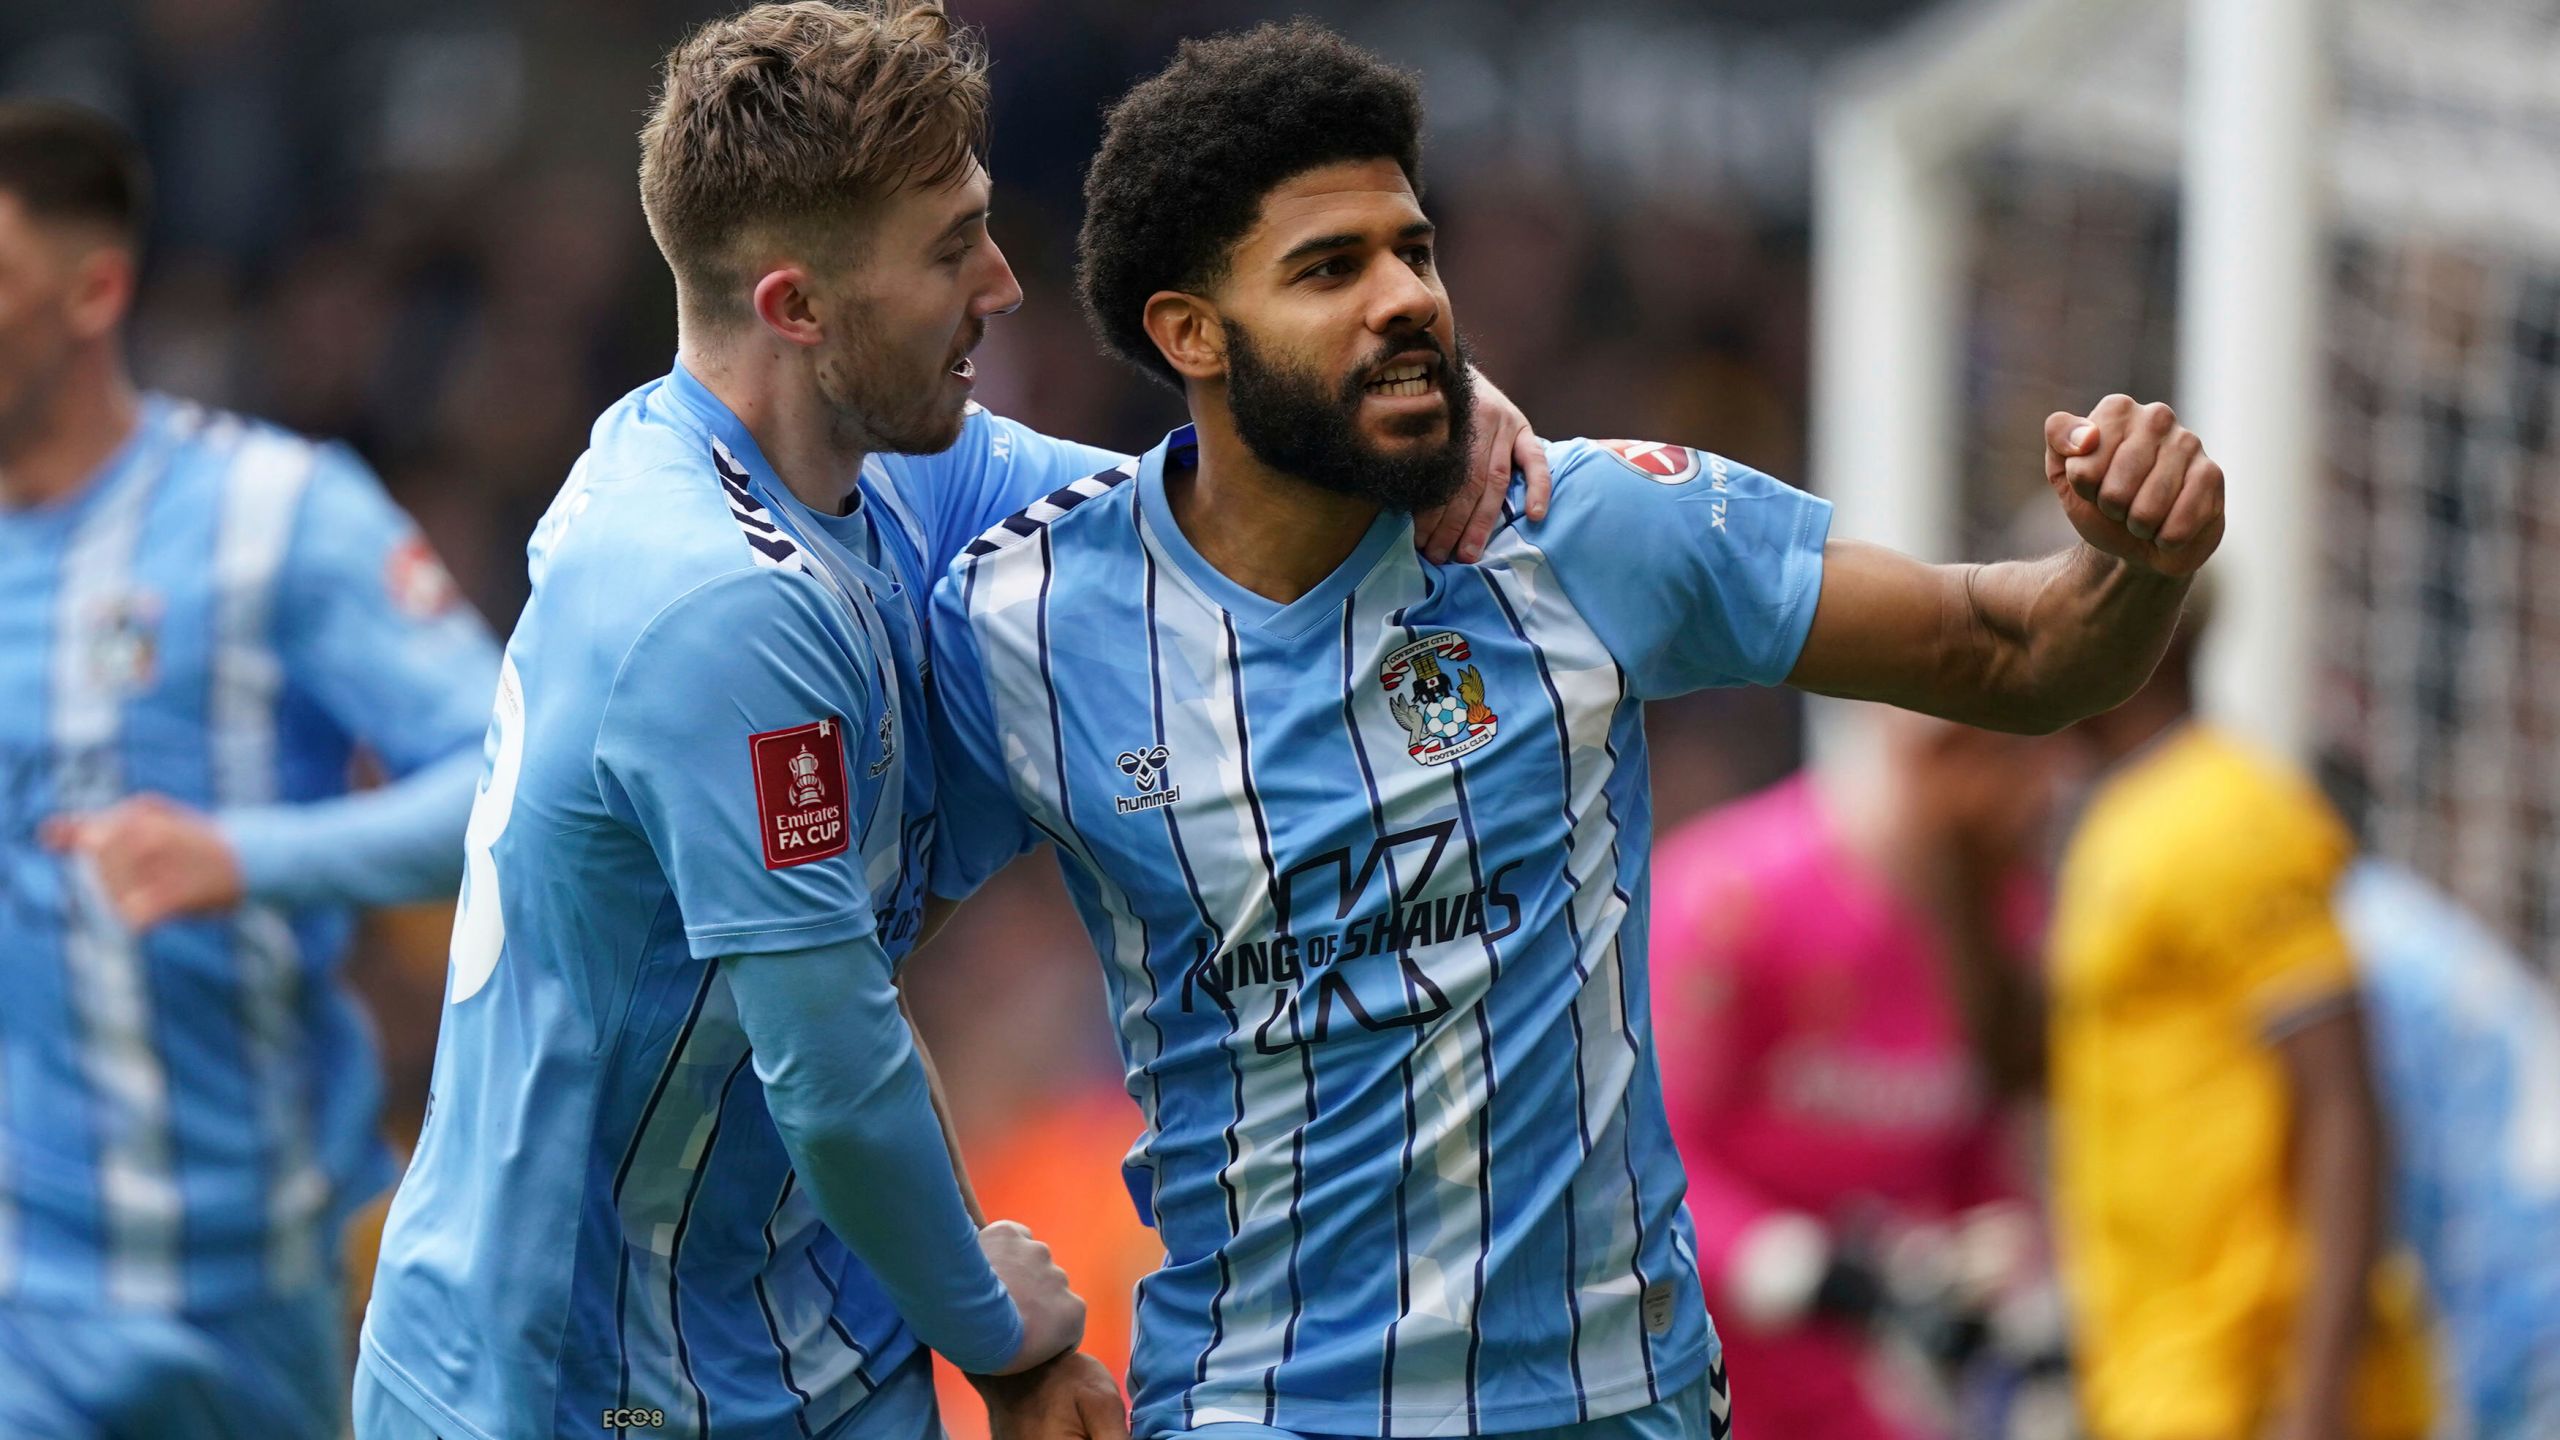 Coventry City's Ellis Simms, right, celebrates with teammate Josh Eccles after scoring his side's first goal of the game, during the English FA Cup quarter final match soccer match between Wolverhampton and Coventry City, at the Molineux, Wolverhampton, England, Saturday, March 16, 2024. (Mike Egerton/PA via AP)